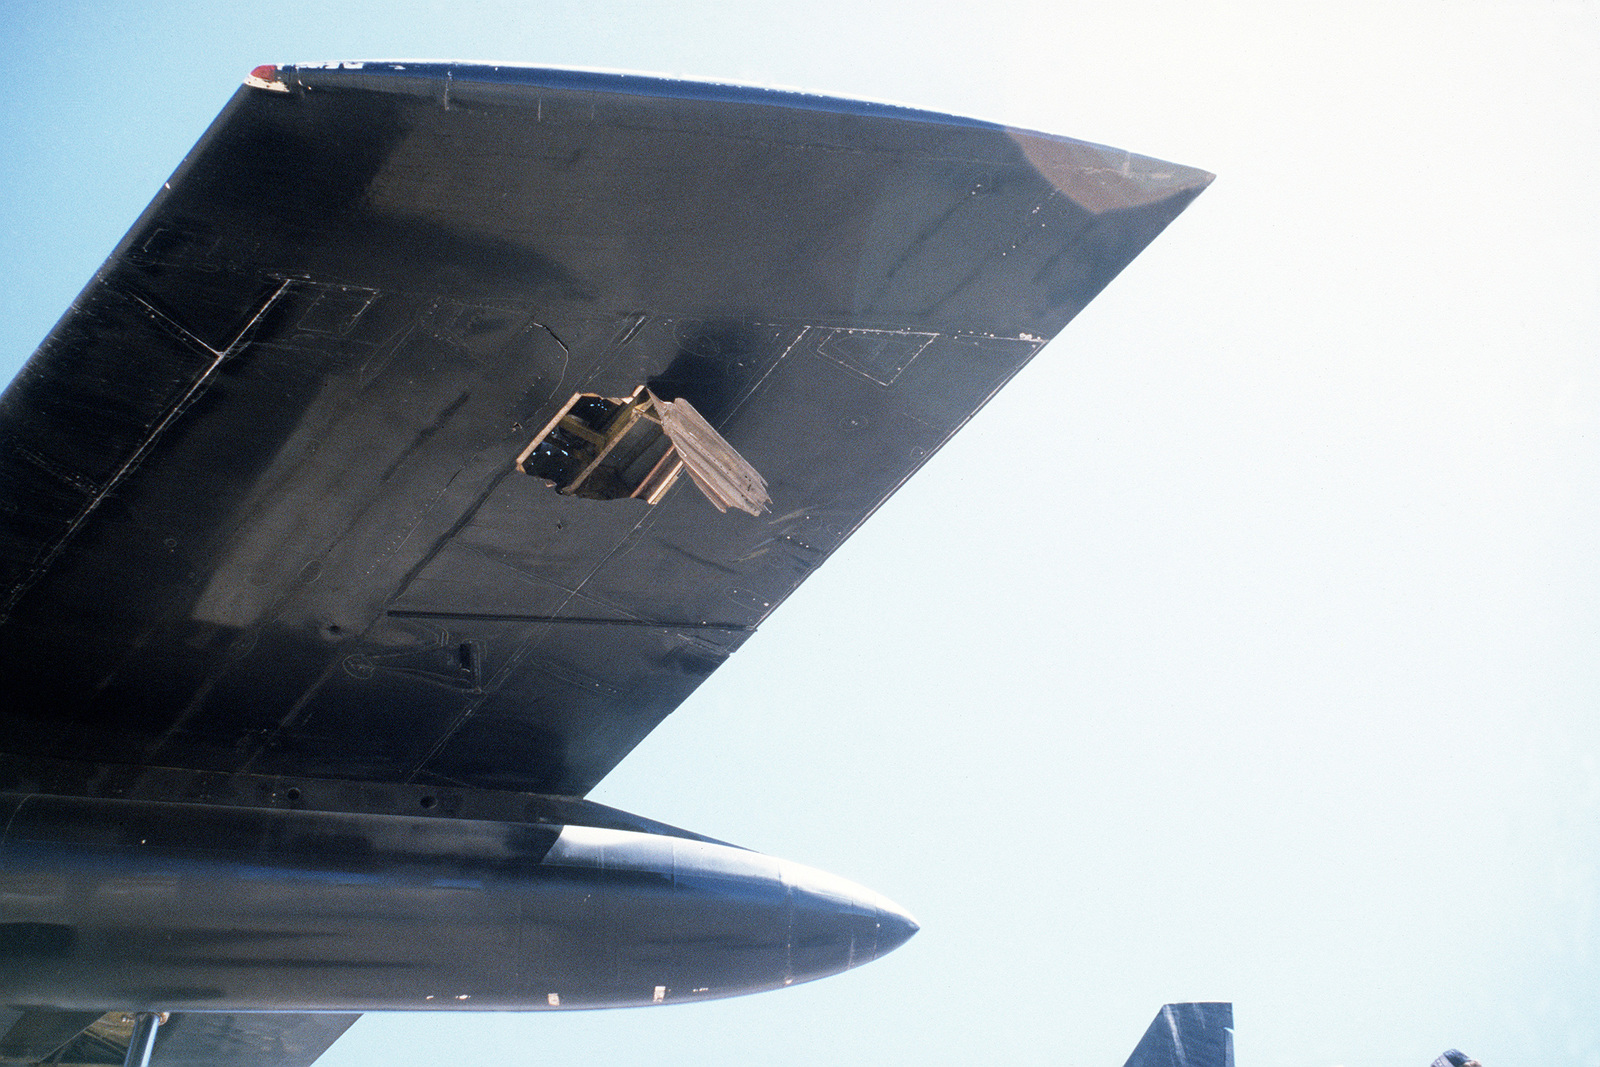 The left wing tip a B-52 Stratofortress aircraft shows damage caused by a high explosive shell ...